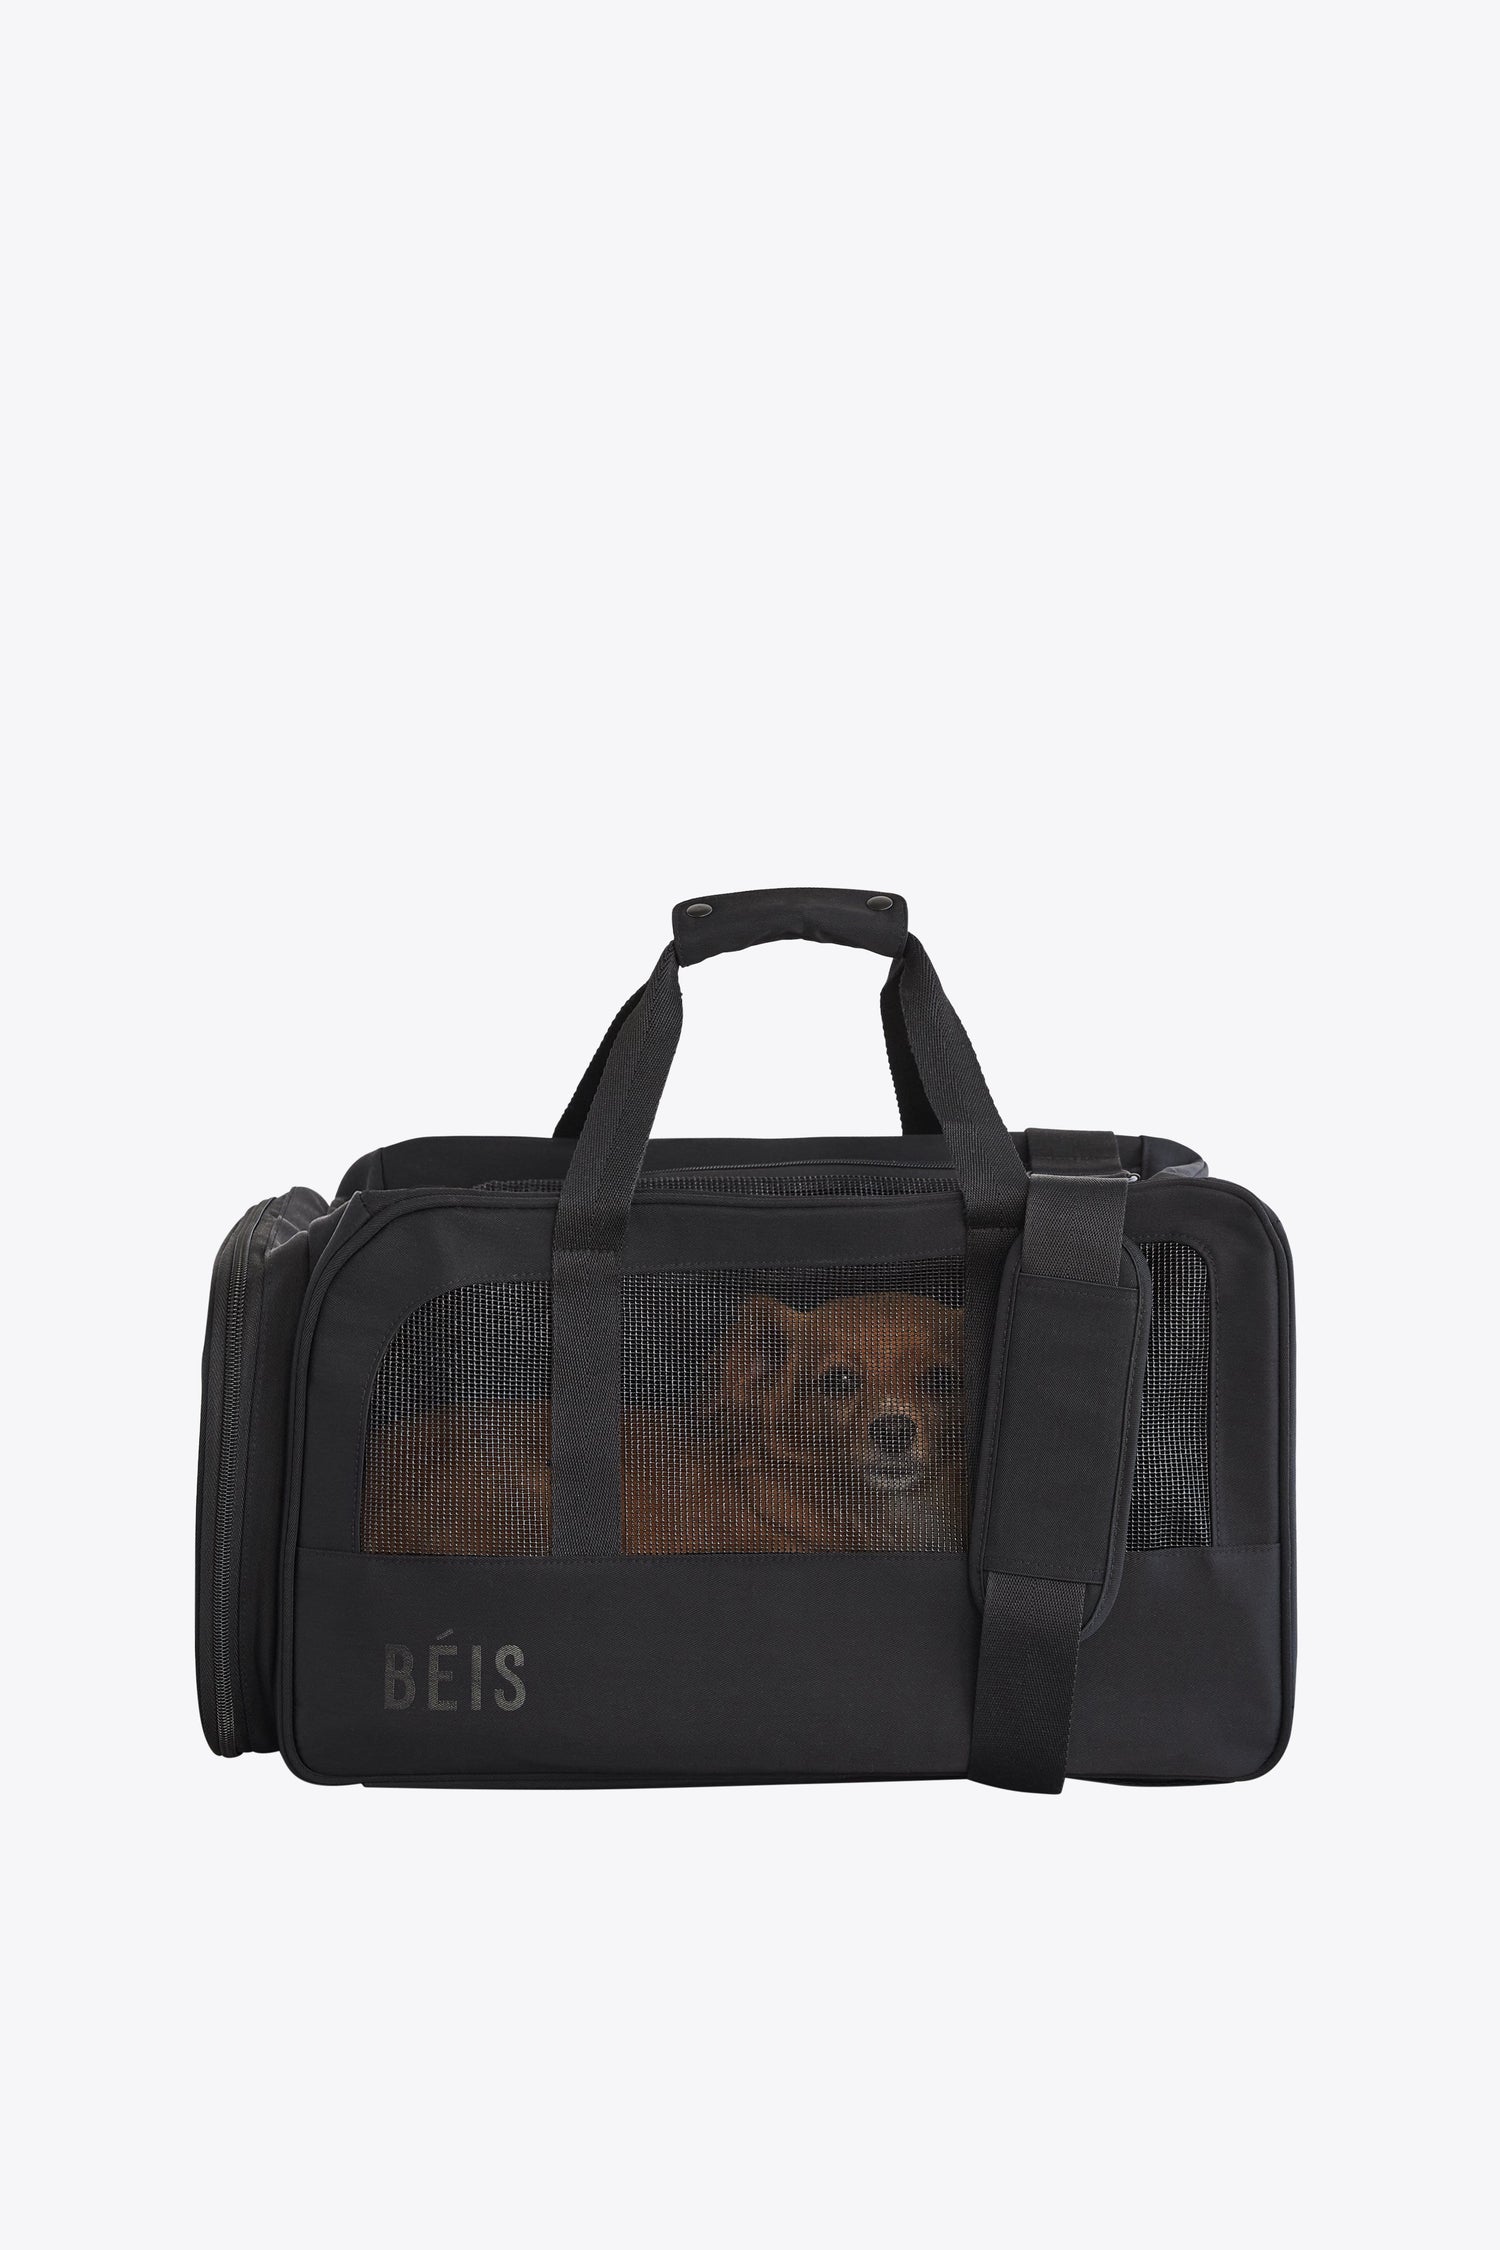 The Regulation Pet Carry-on